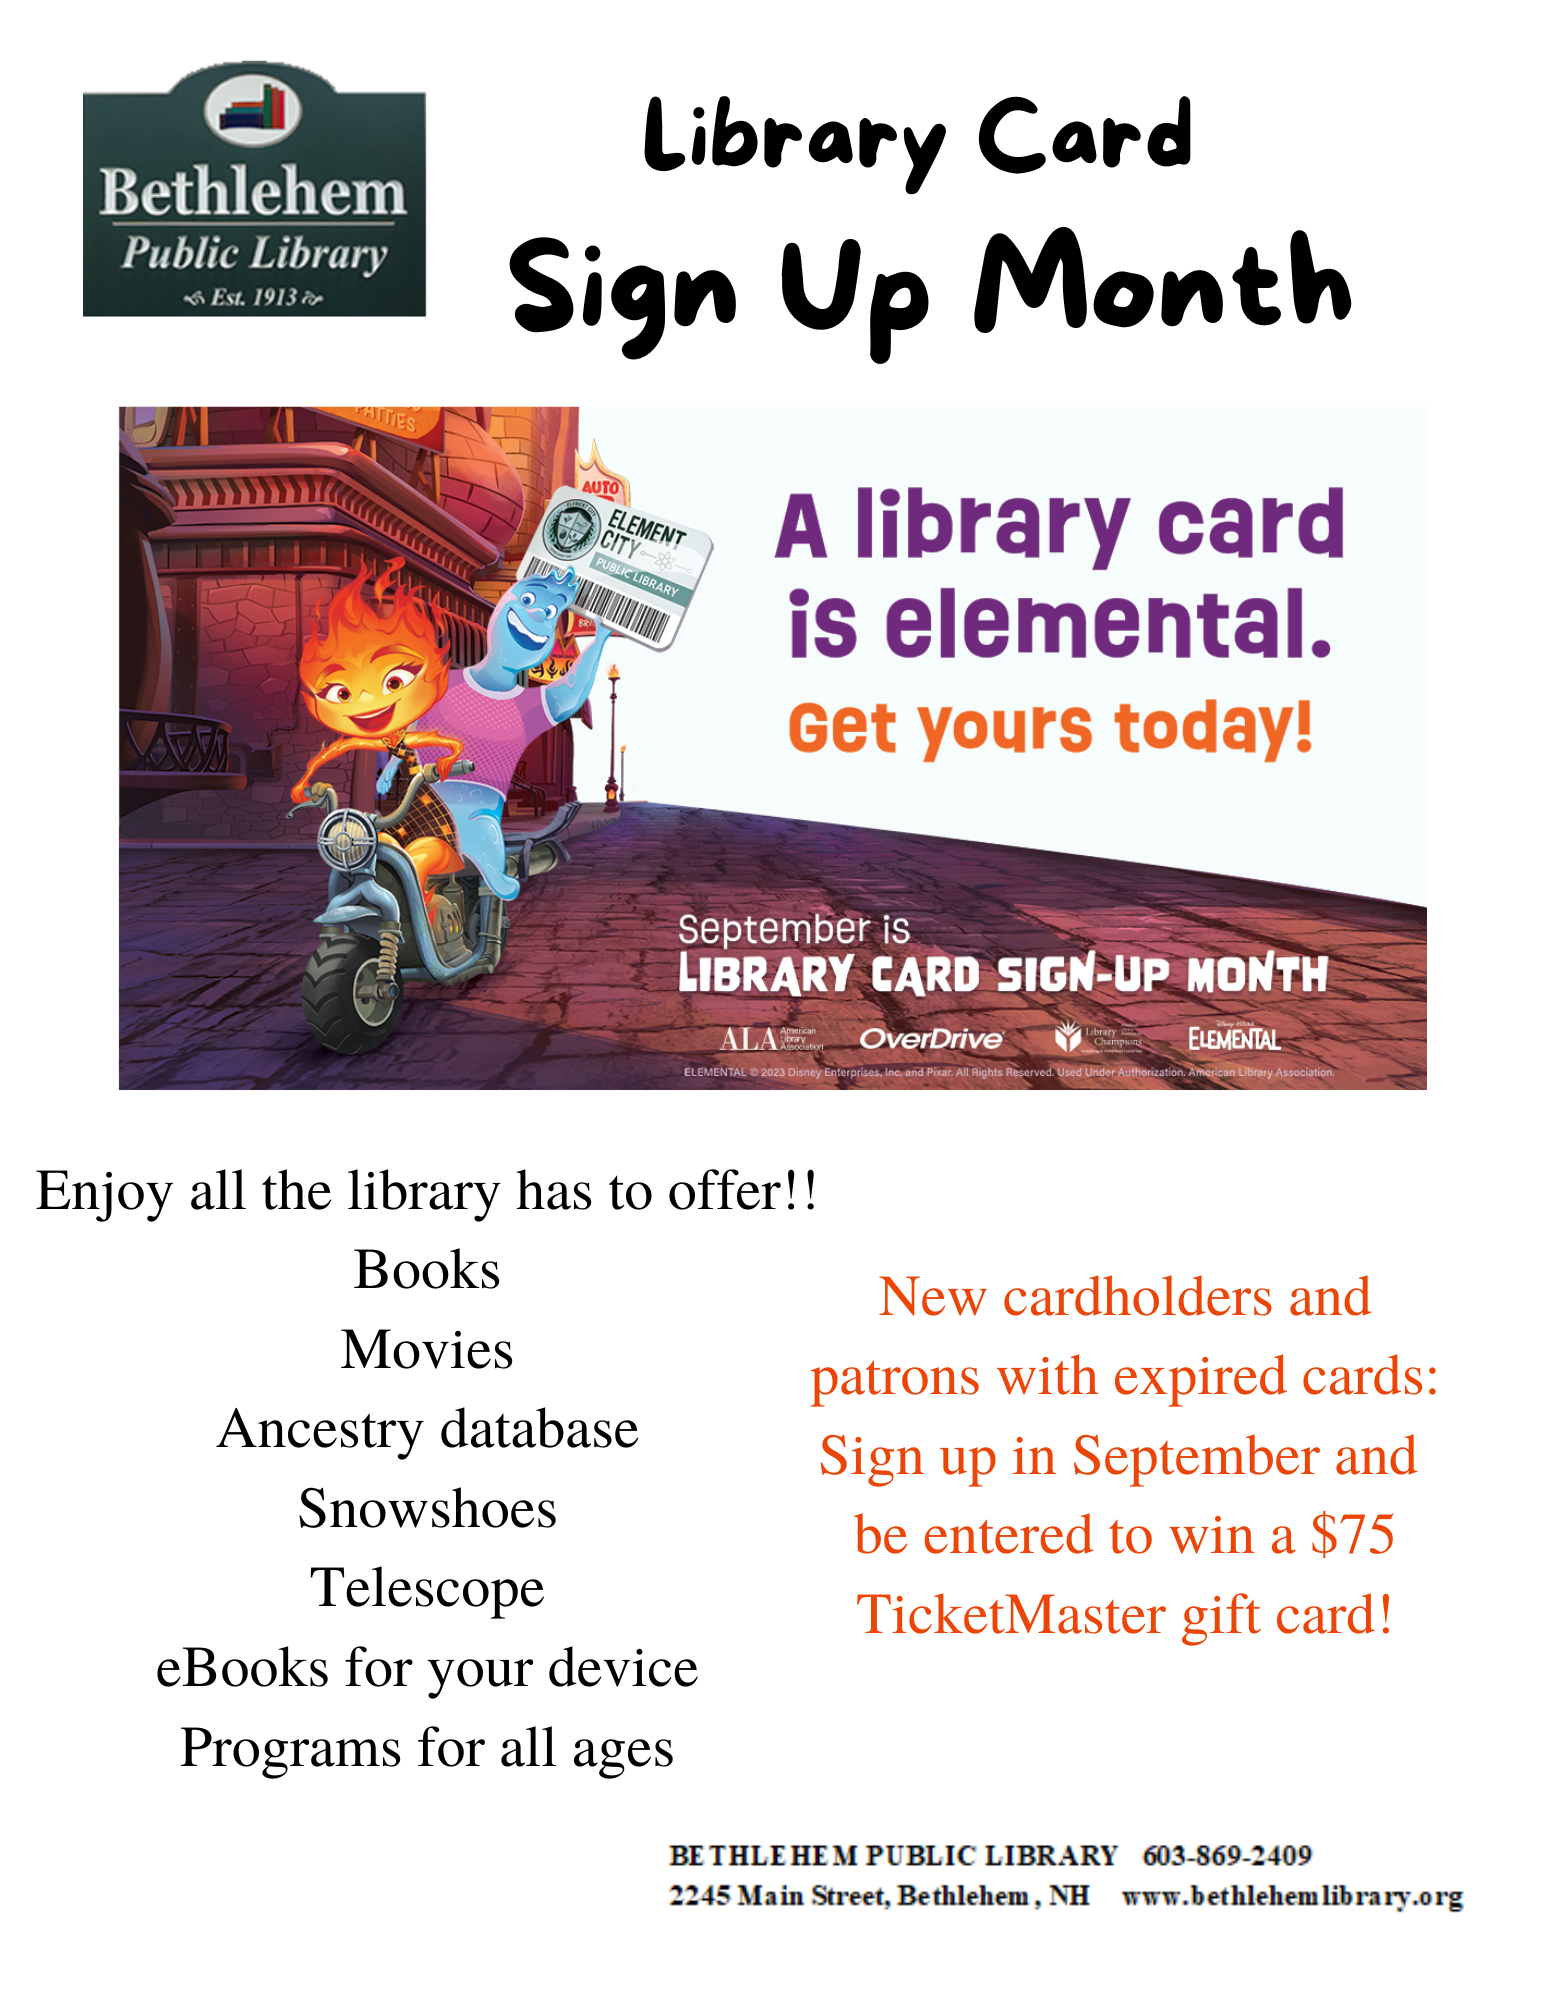 Library Card Sign Up Month.  Enjoy all the library has to offer!! Books Movies Ancestry database Snowshoes Telescope eBooks for your device Programs for all ages. New cardholders and patrons with expired cards: Sign up in September and  be entered to win a $75 TicketMaster gift card!